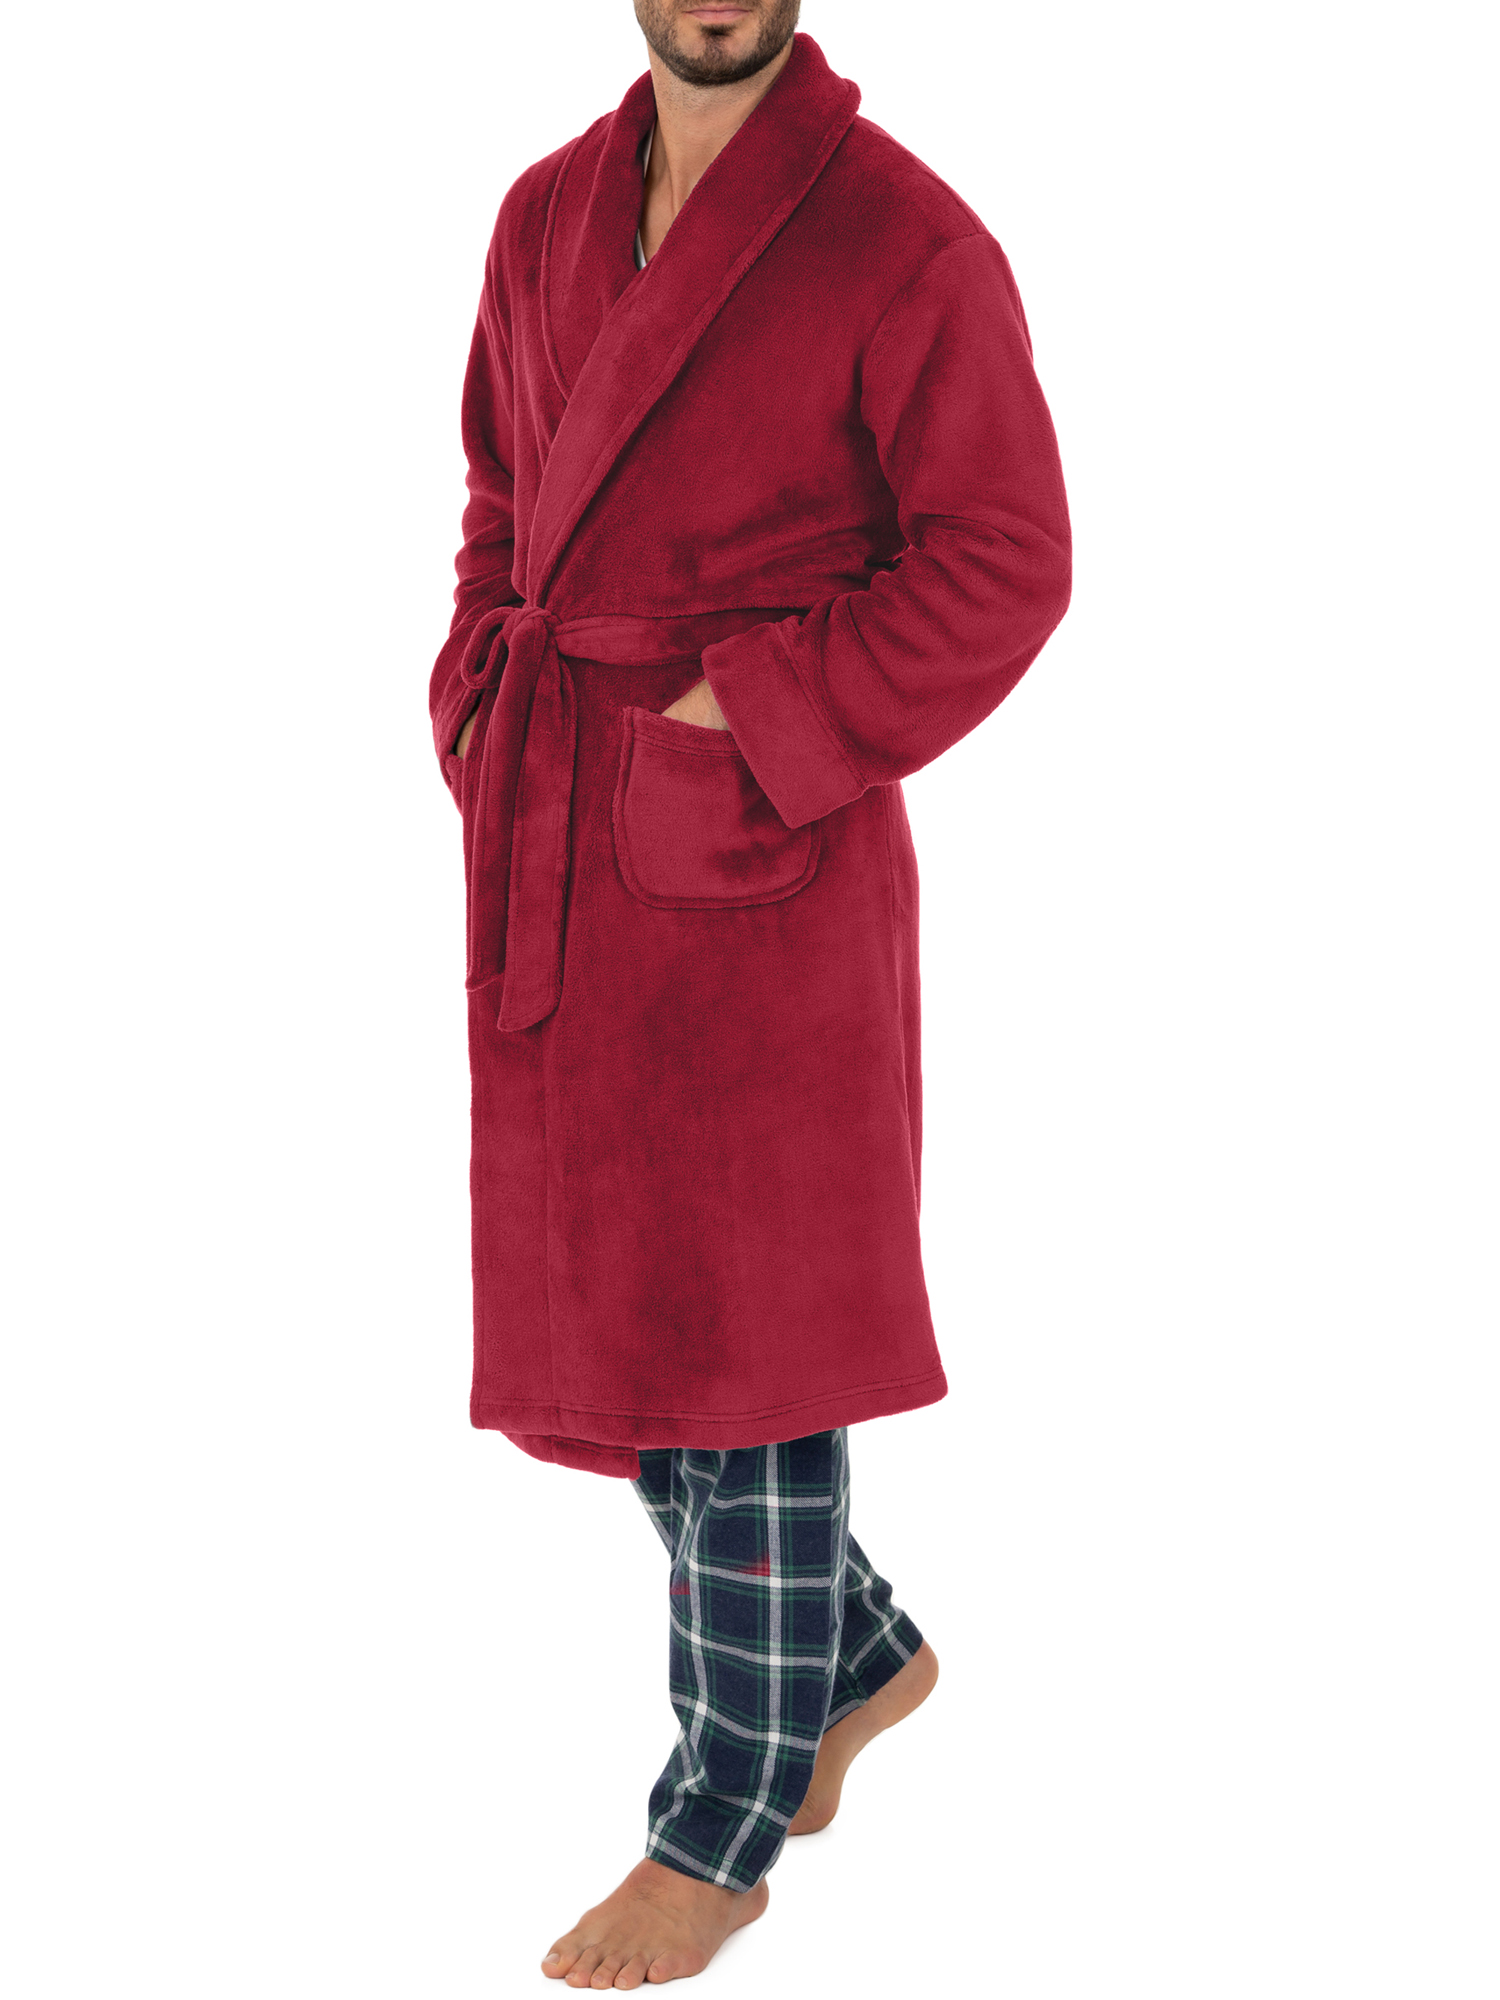 Fruit of the Loom Adult Mens Solid Plush Fleece Bathrobe One Size - image 2 of 4